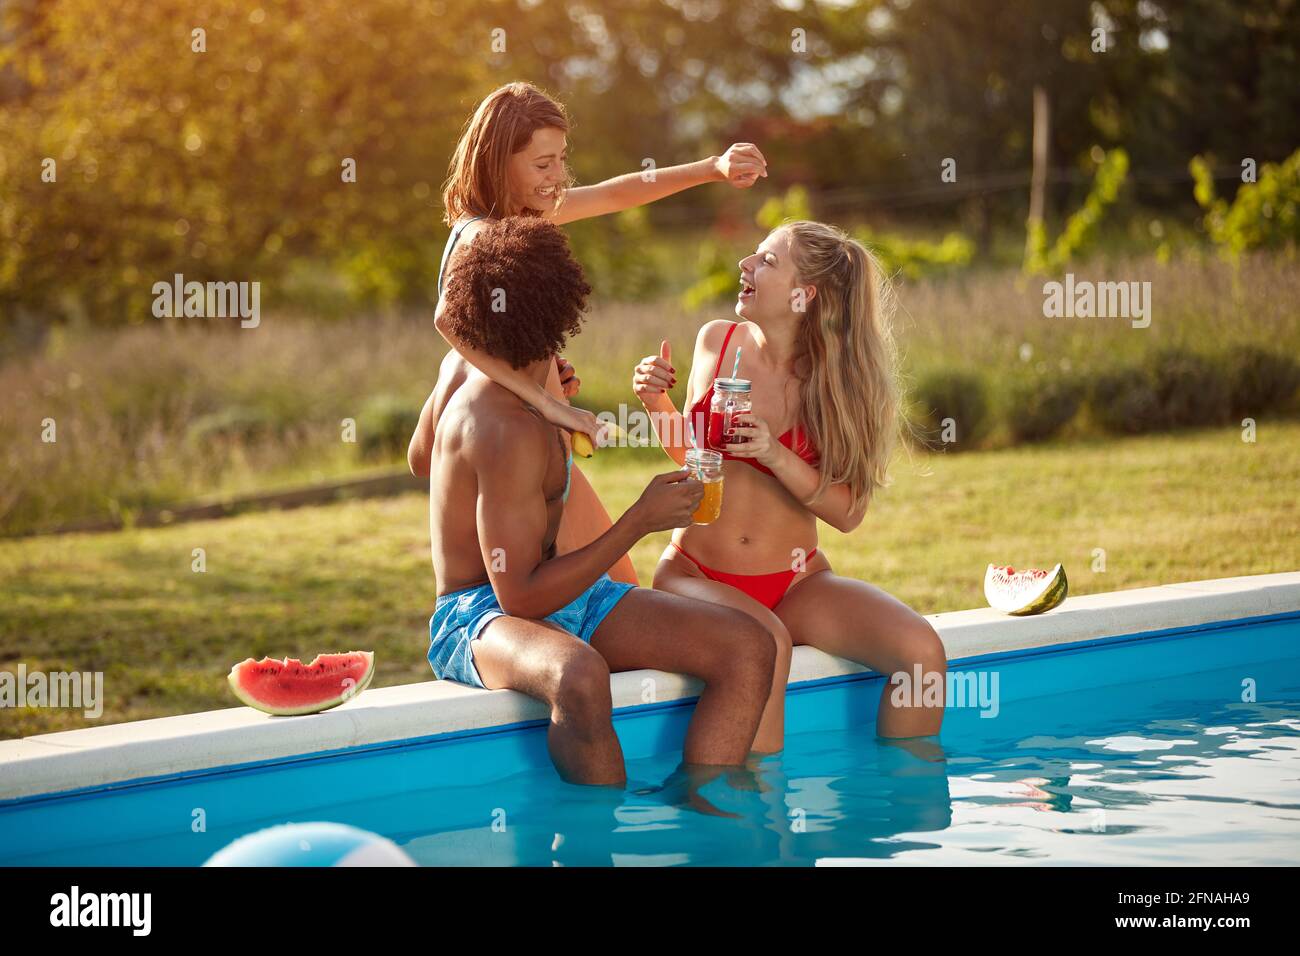 one afro-american young man having fun with two caucasian women by the pool Stock Photo